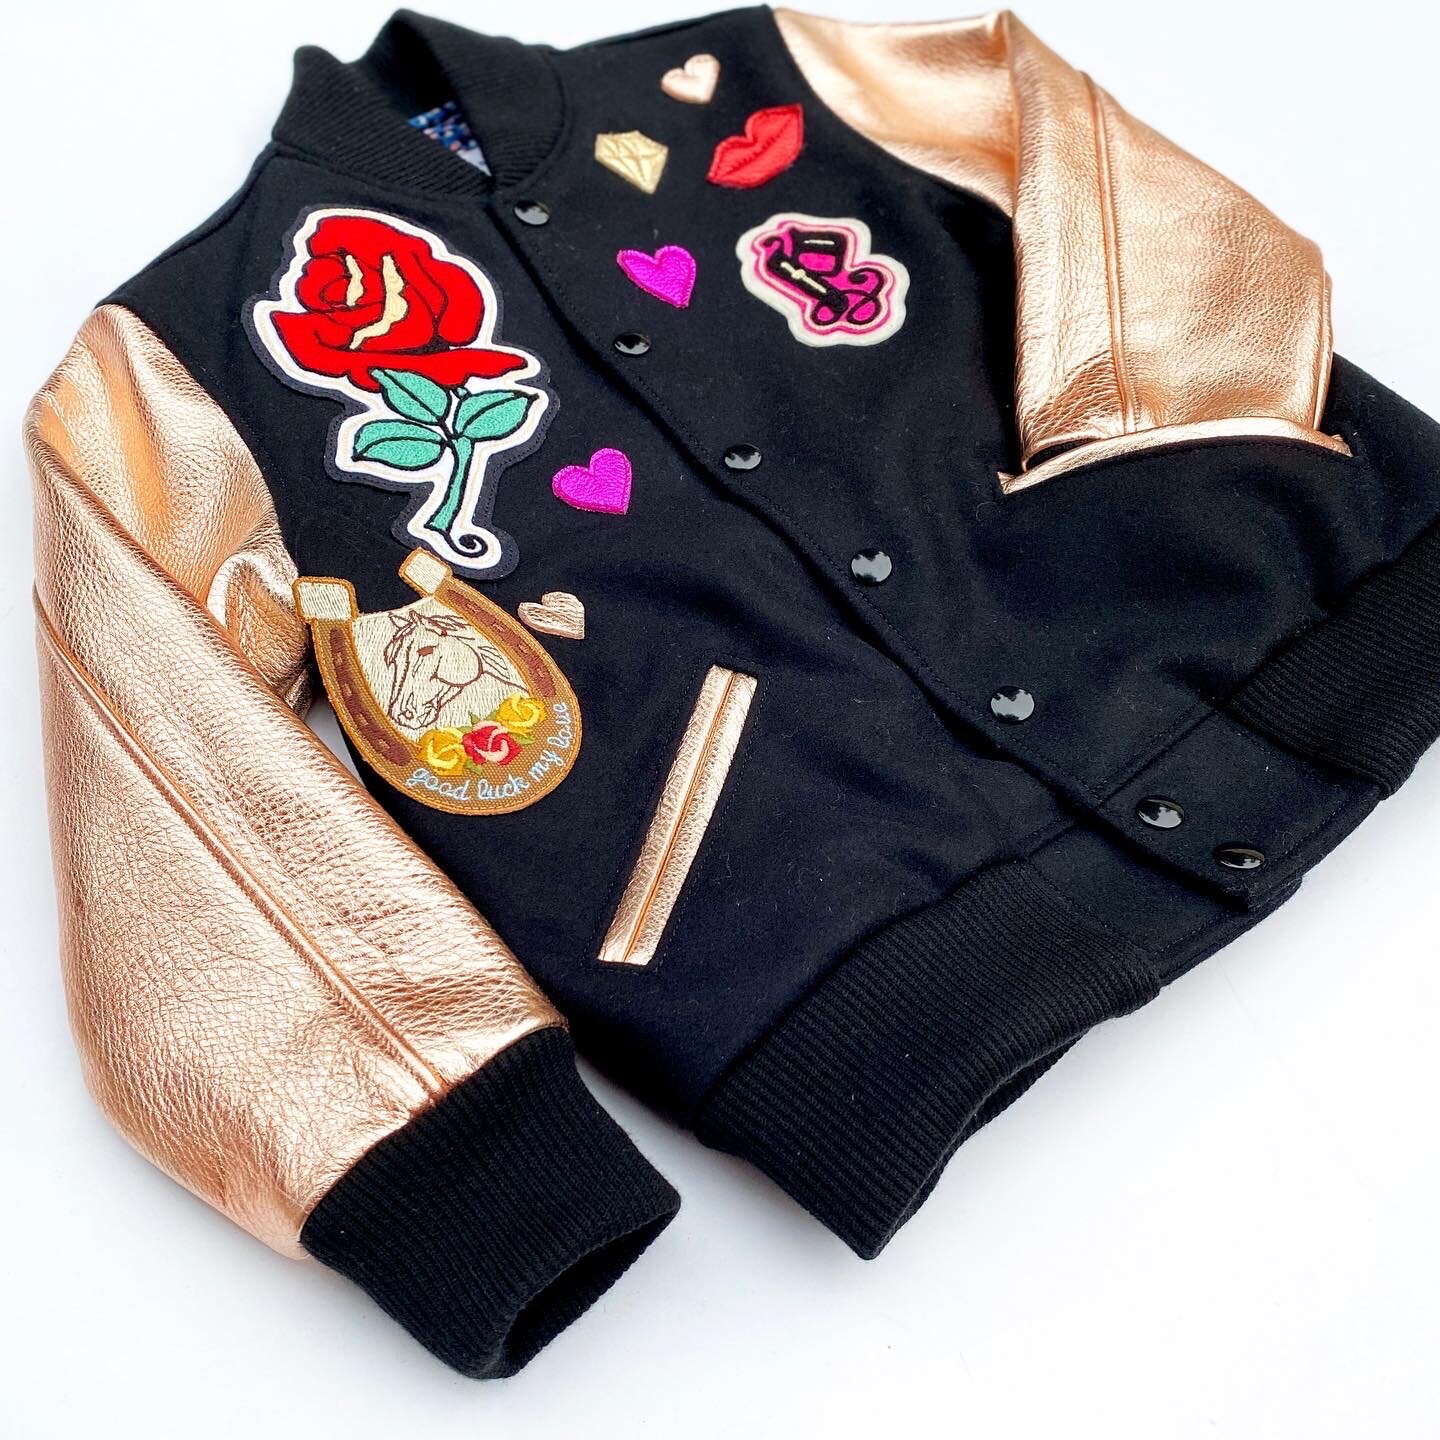  Black wool, rose gold metallic leather, chainstitch patches by Gustavo Martinez 